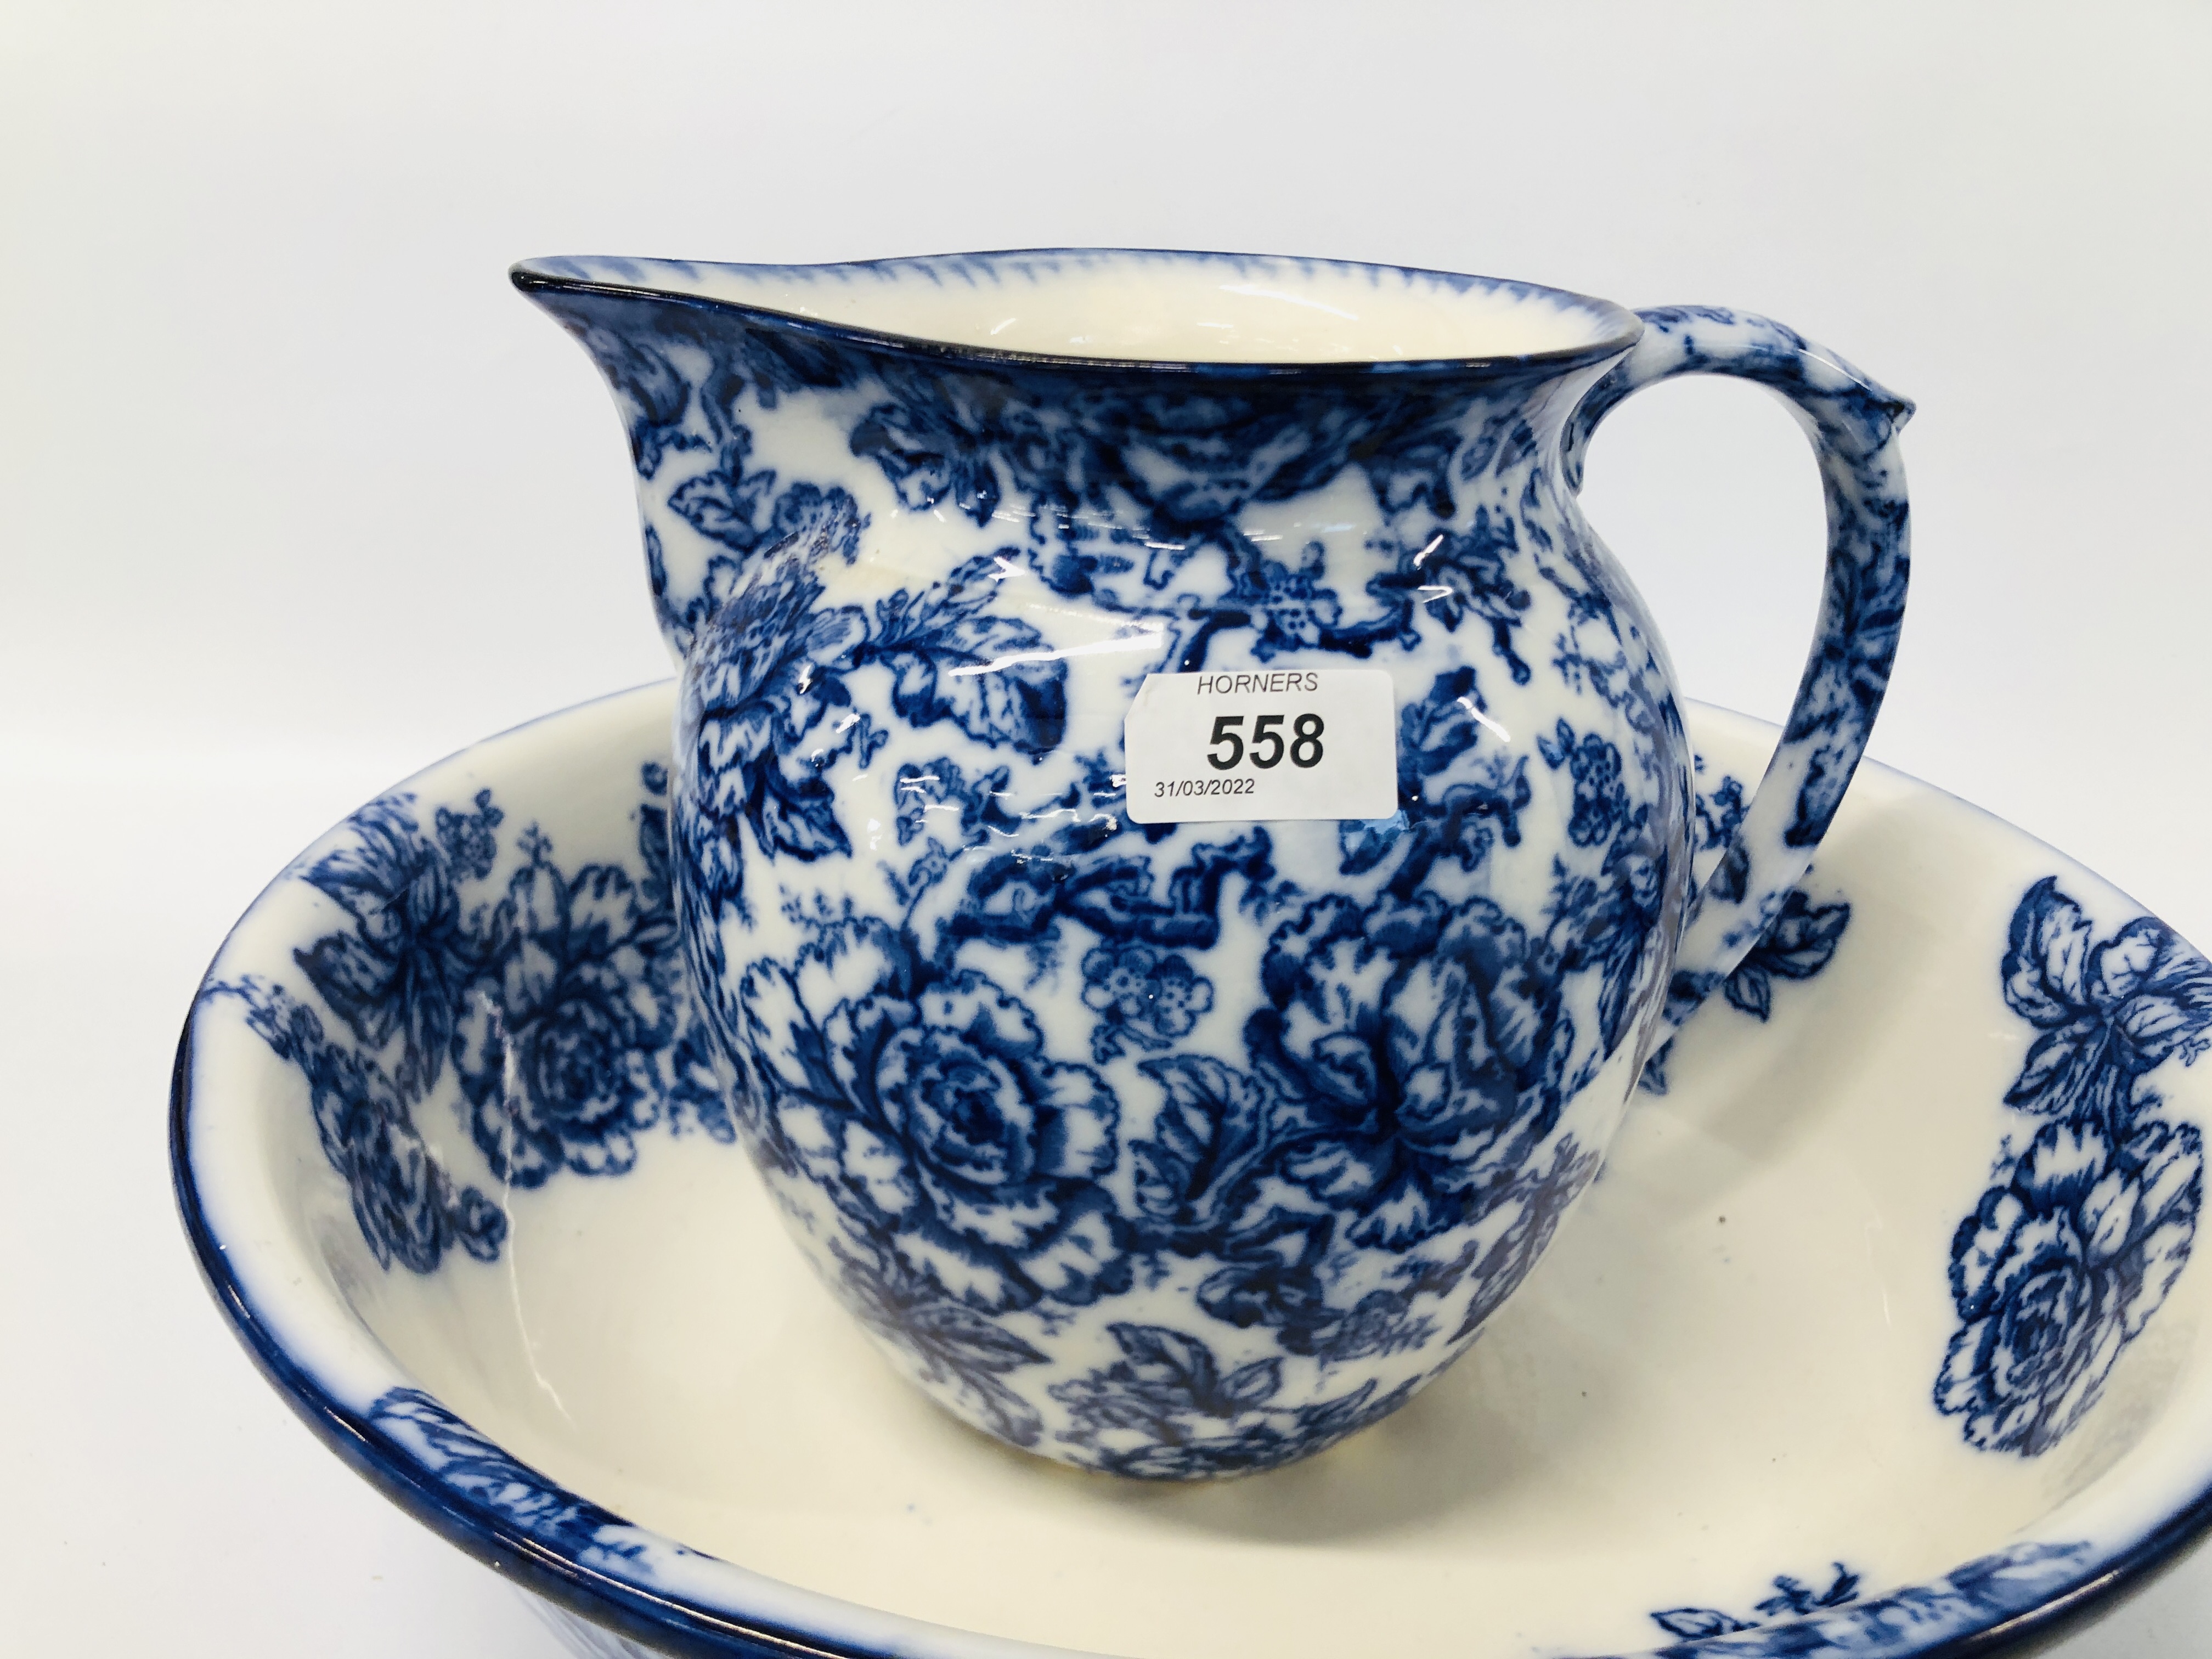 LOSOL WARE "CAVENDISH" BLUE AND WHITE ROSE DECORATED WASH JUG AND BOWL ALONG WITH A "BOOTHS" - Image 7 of 11